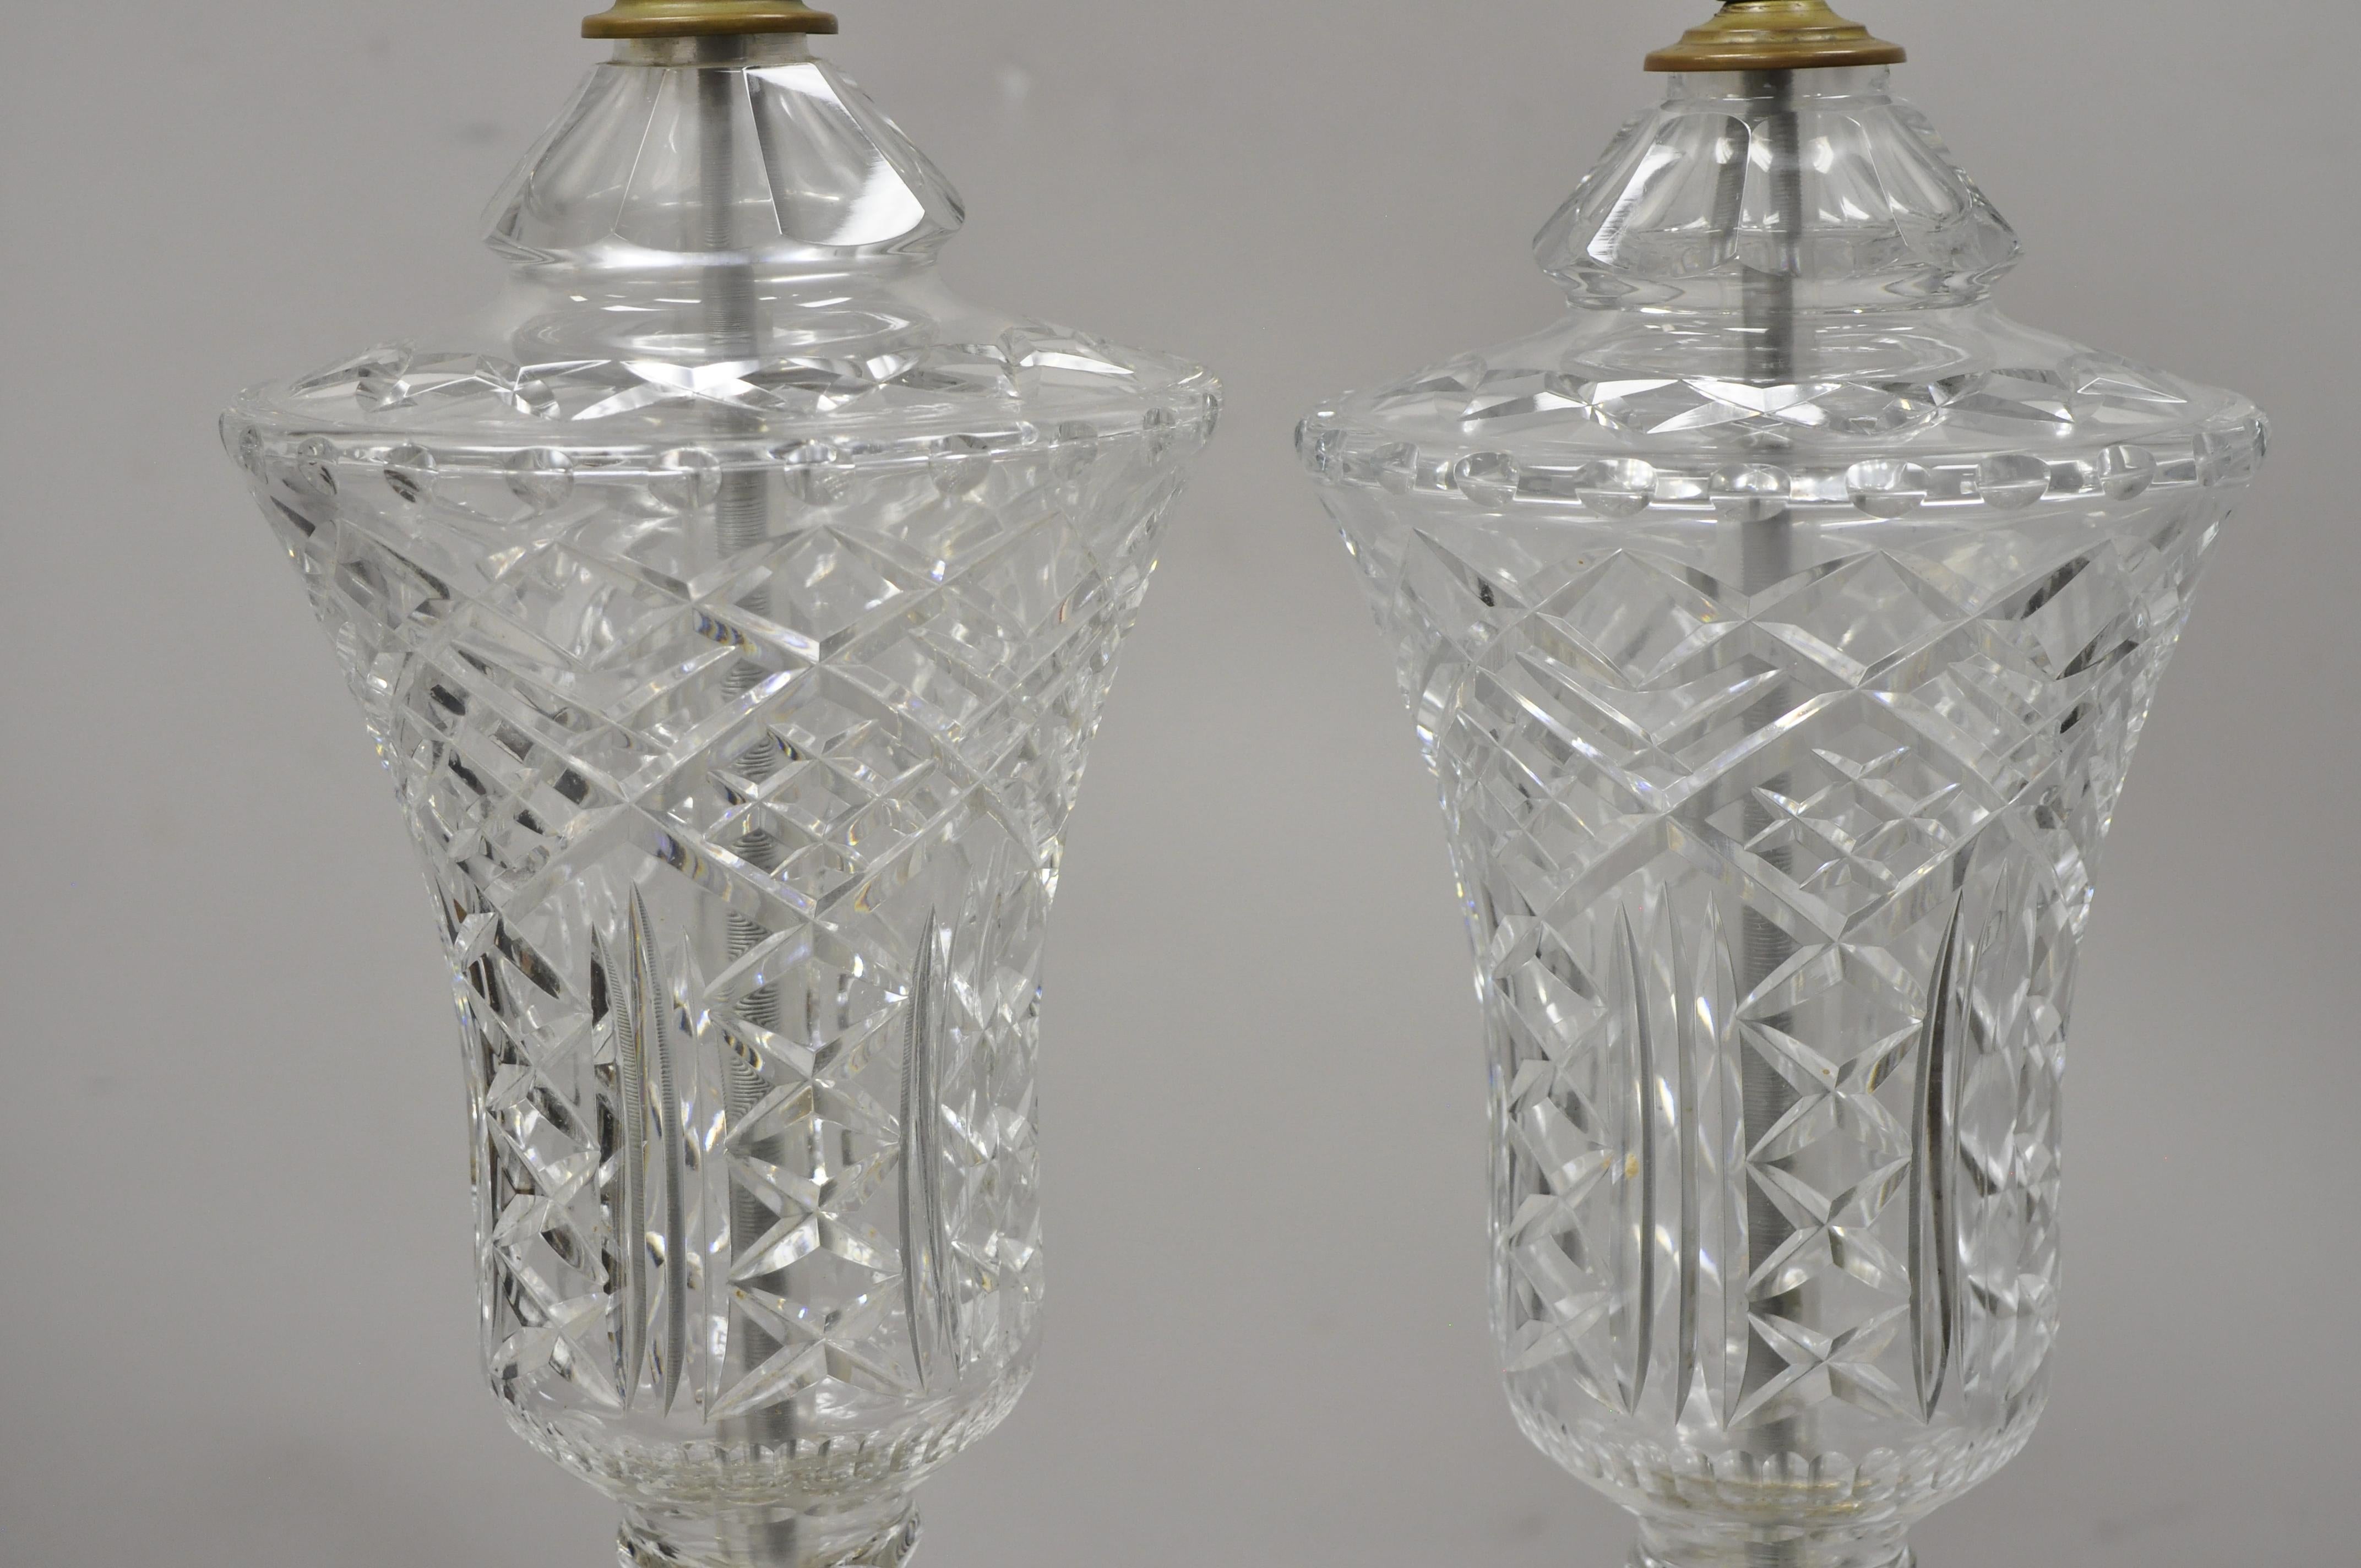 Antique cut crystal glass urn form body brass base Victorian table lamp, a pair. Item features cut crystal glass urn form body, brass base, very nice antique pair, great style and form, circa early 1900s. Measurements: 34